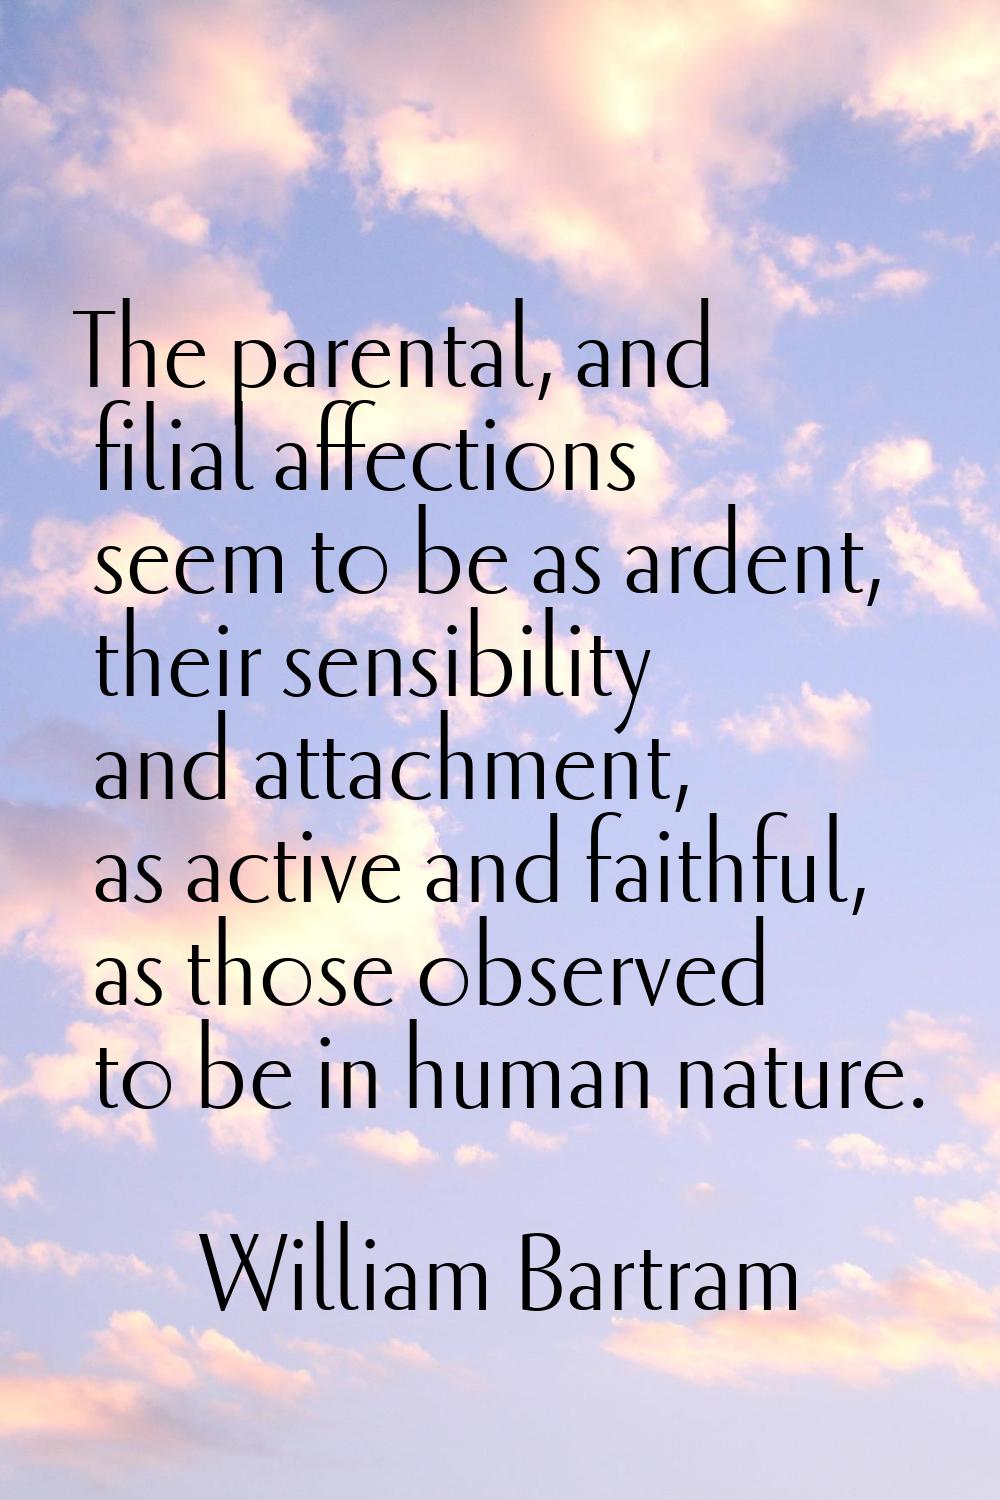 The parental, and filial affections seem to be as ardent, their sensibility and attachment, as acti